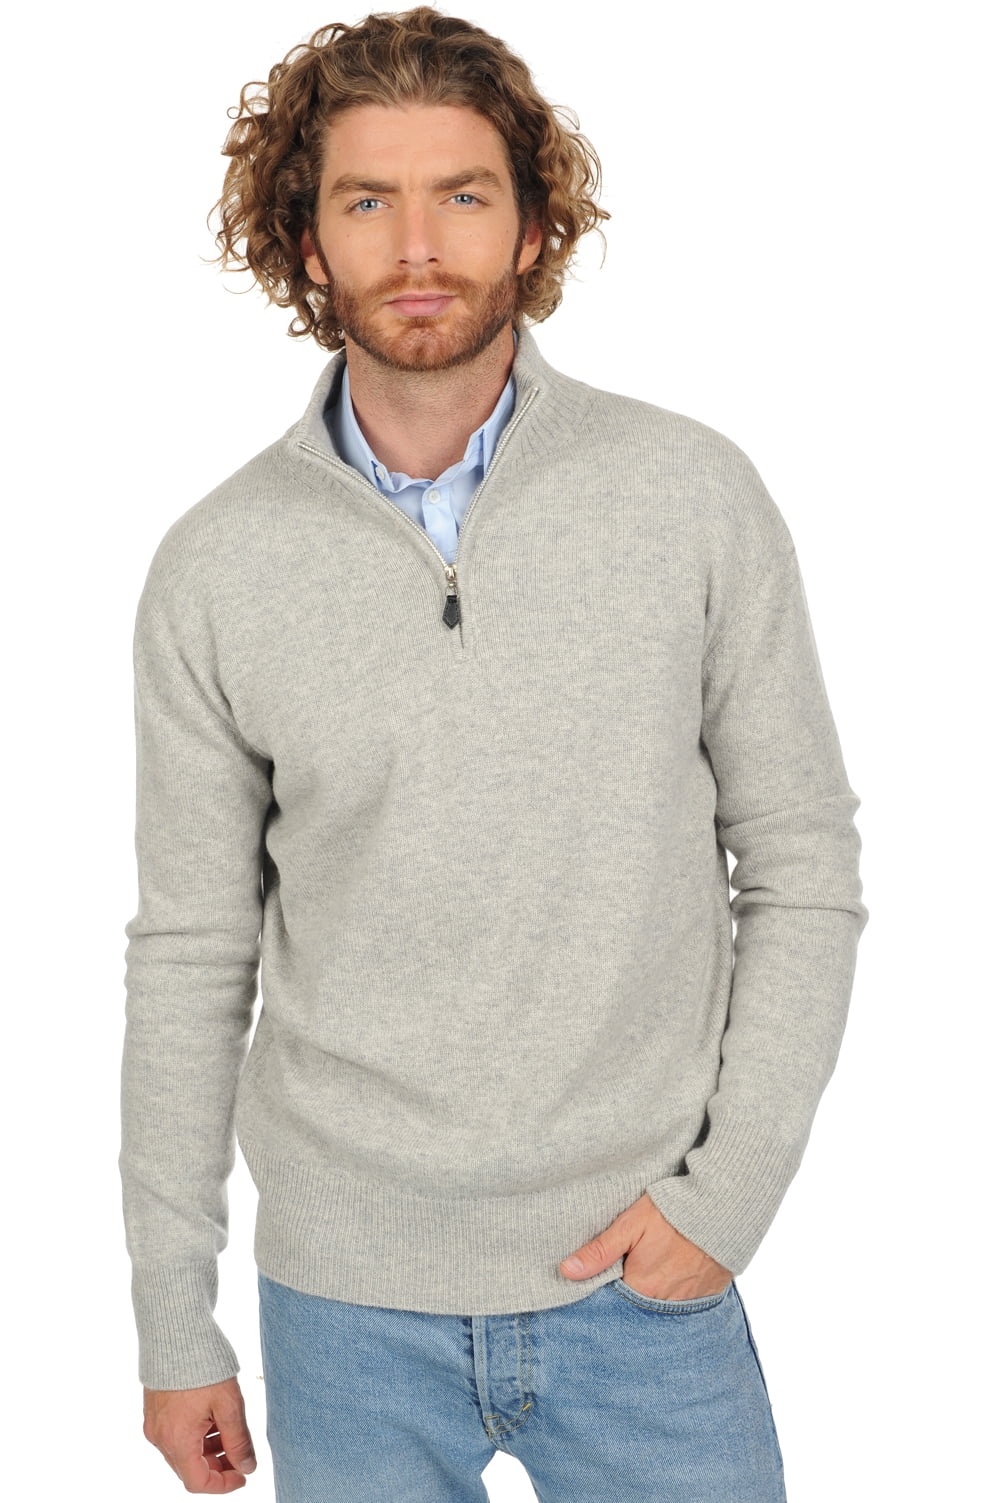 Cashmere men polo style sweaters donovan flanelle chine xs